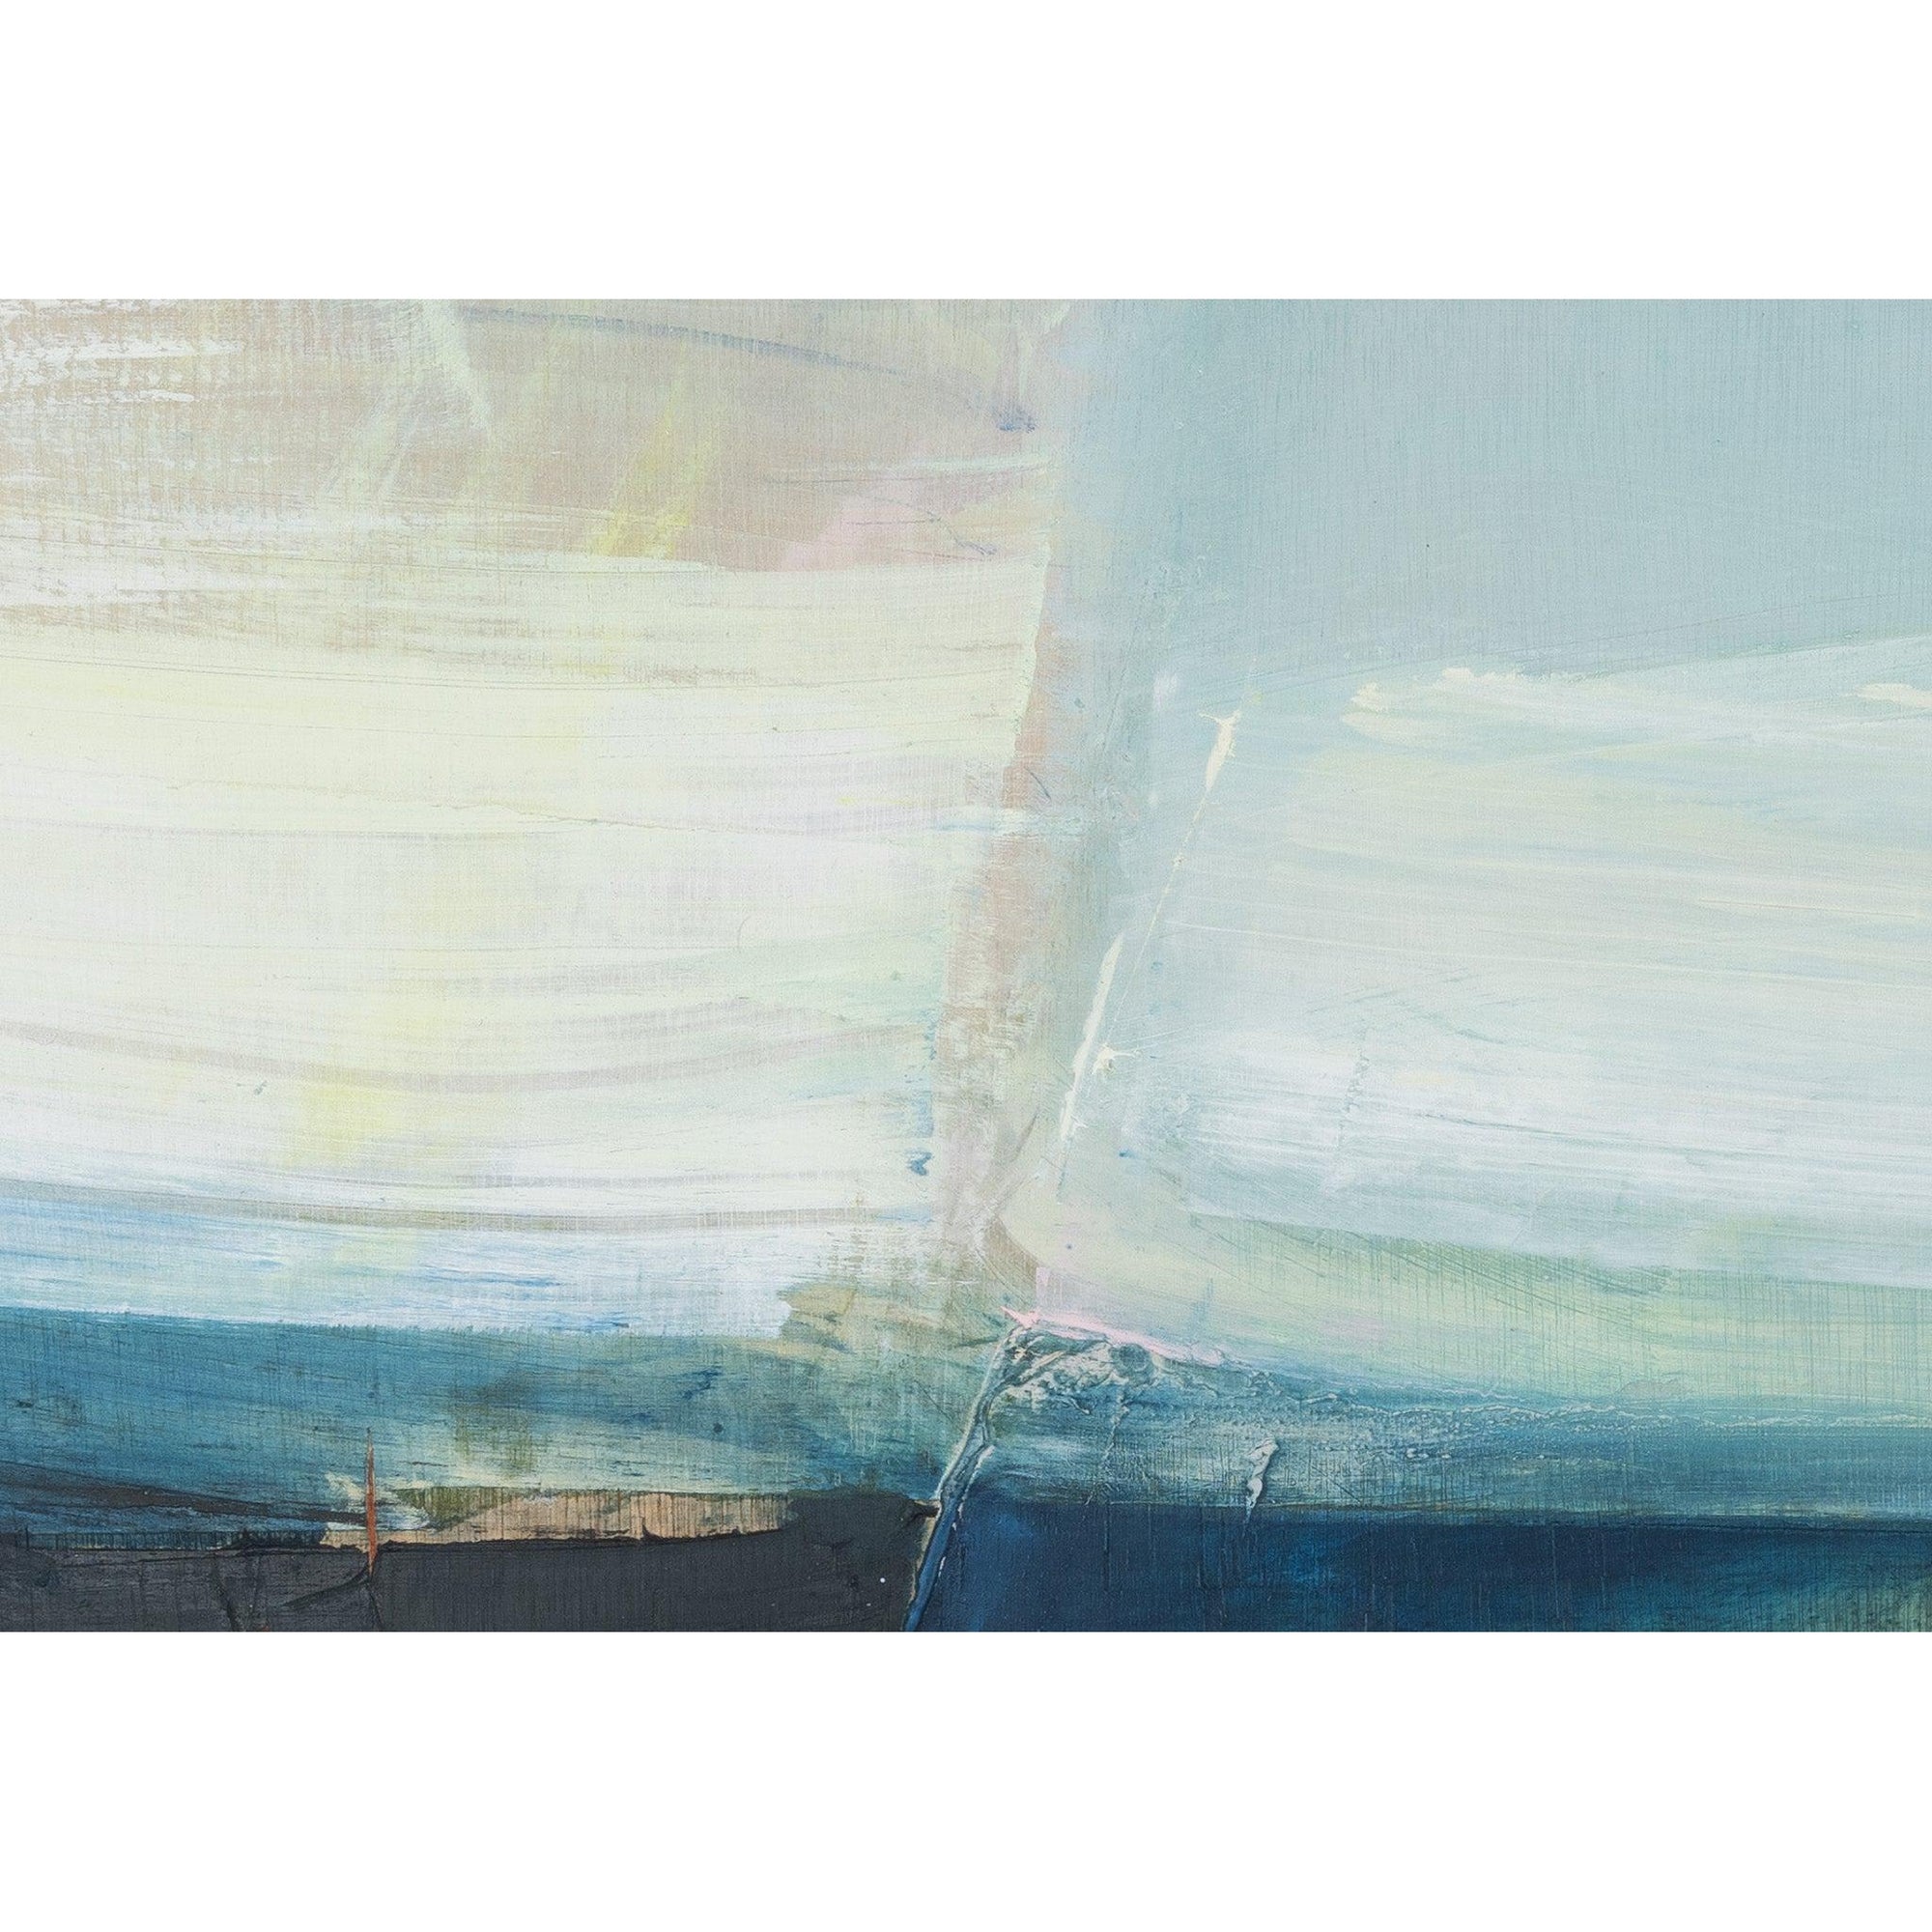 'Latitude' oil original by Justine Lois Thorpe, available at Padstow Gallery, Cornwall